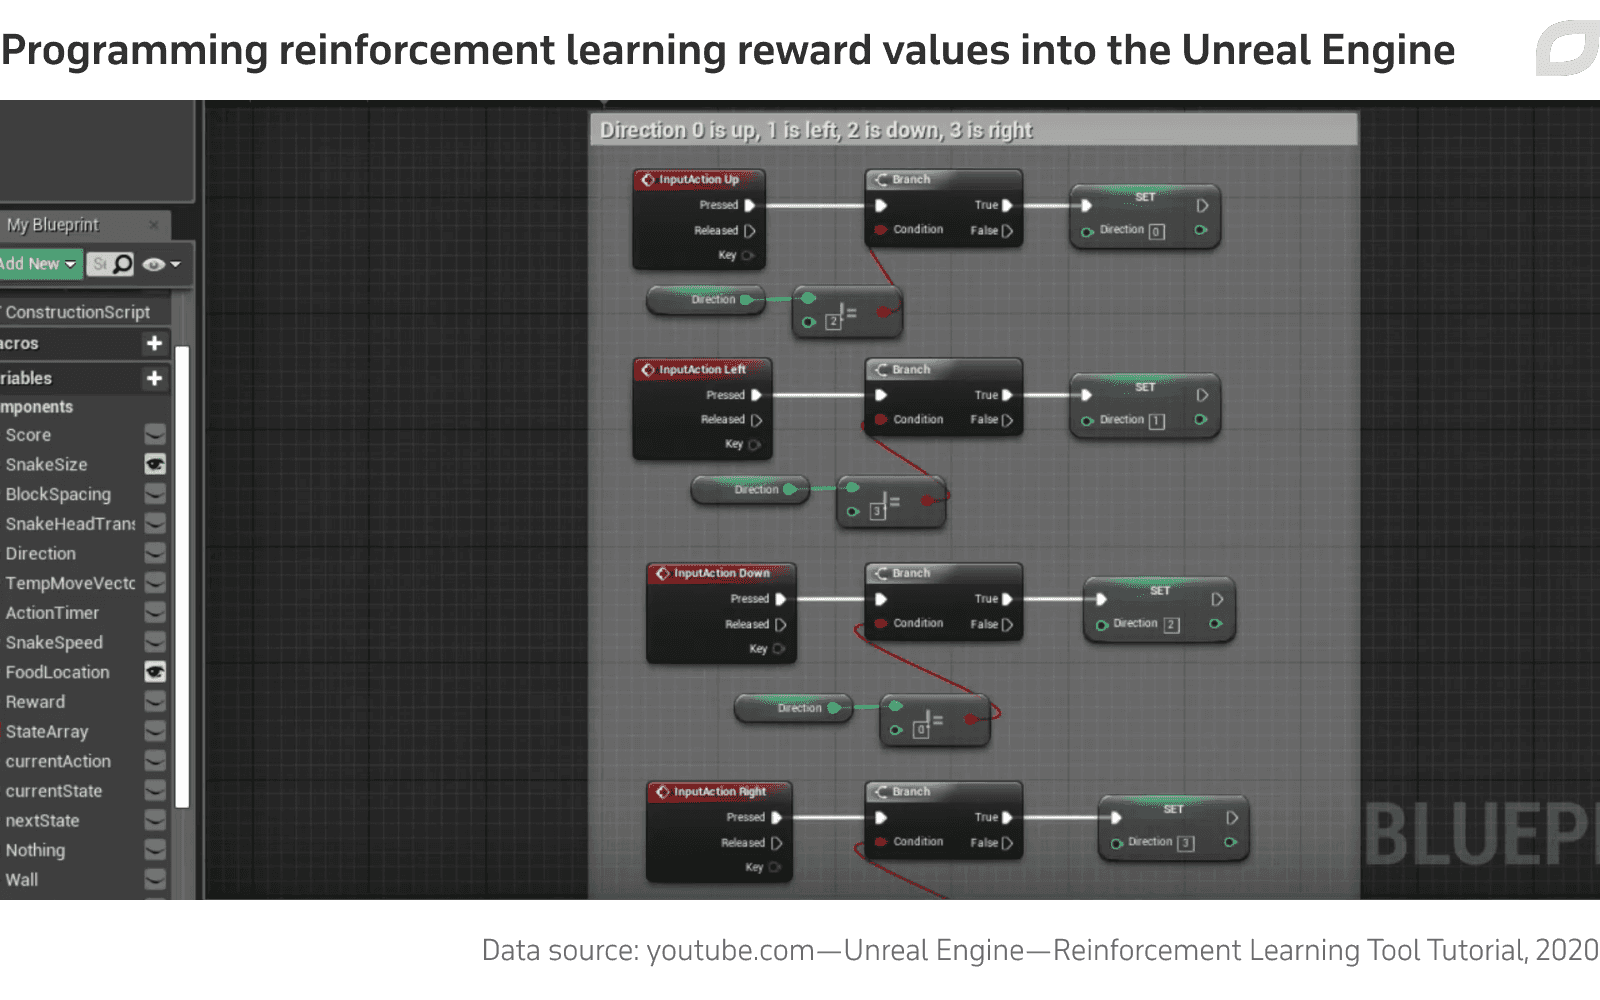 Programming reinforcement learning reward values into the Unreal Engine